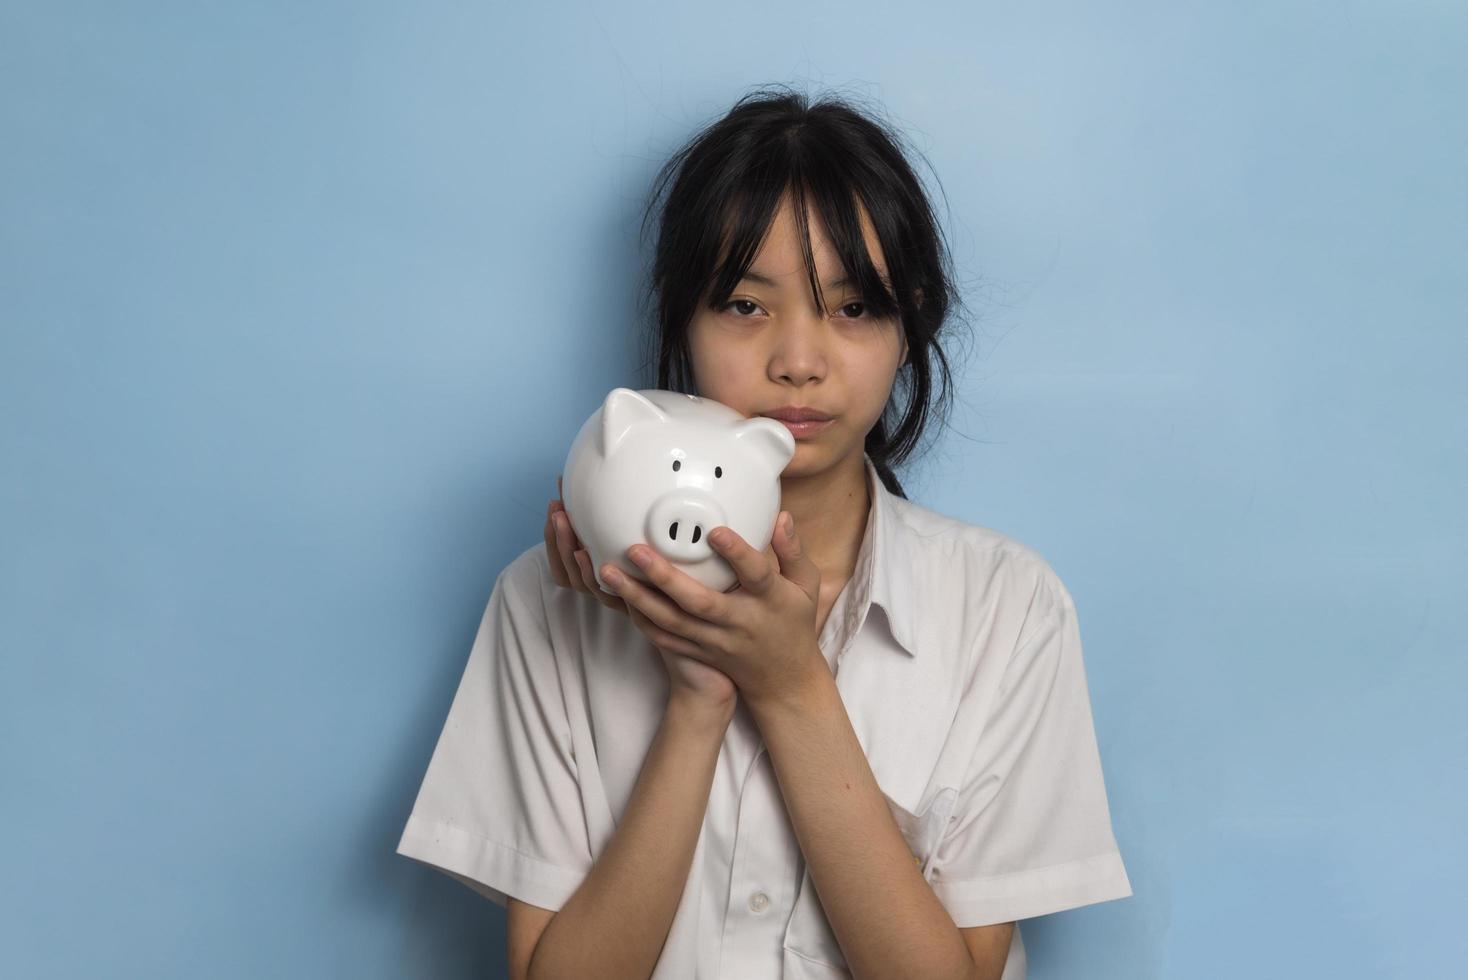 child asian finance economic investment wealth pig currency money business banking, cash success saving girl holding coin piggy bank. photo